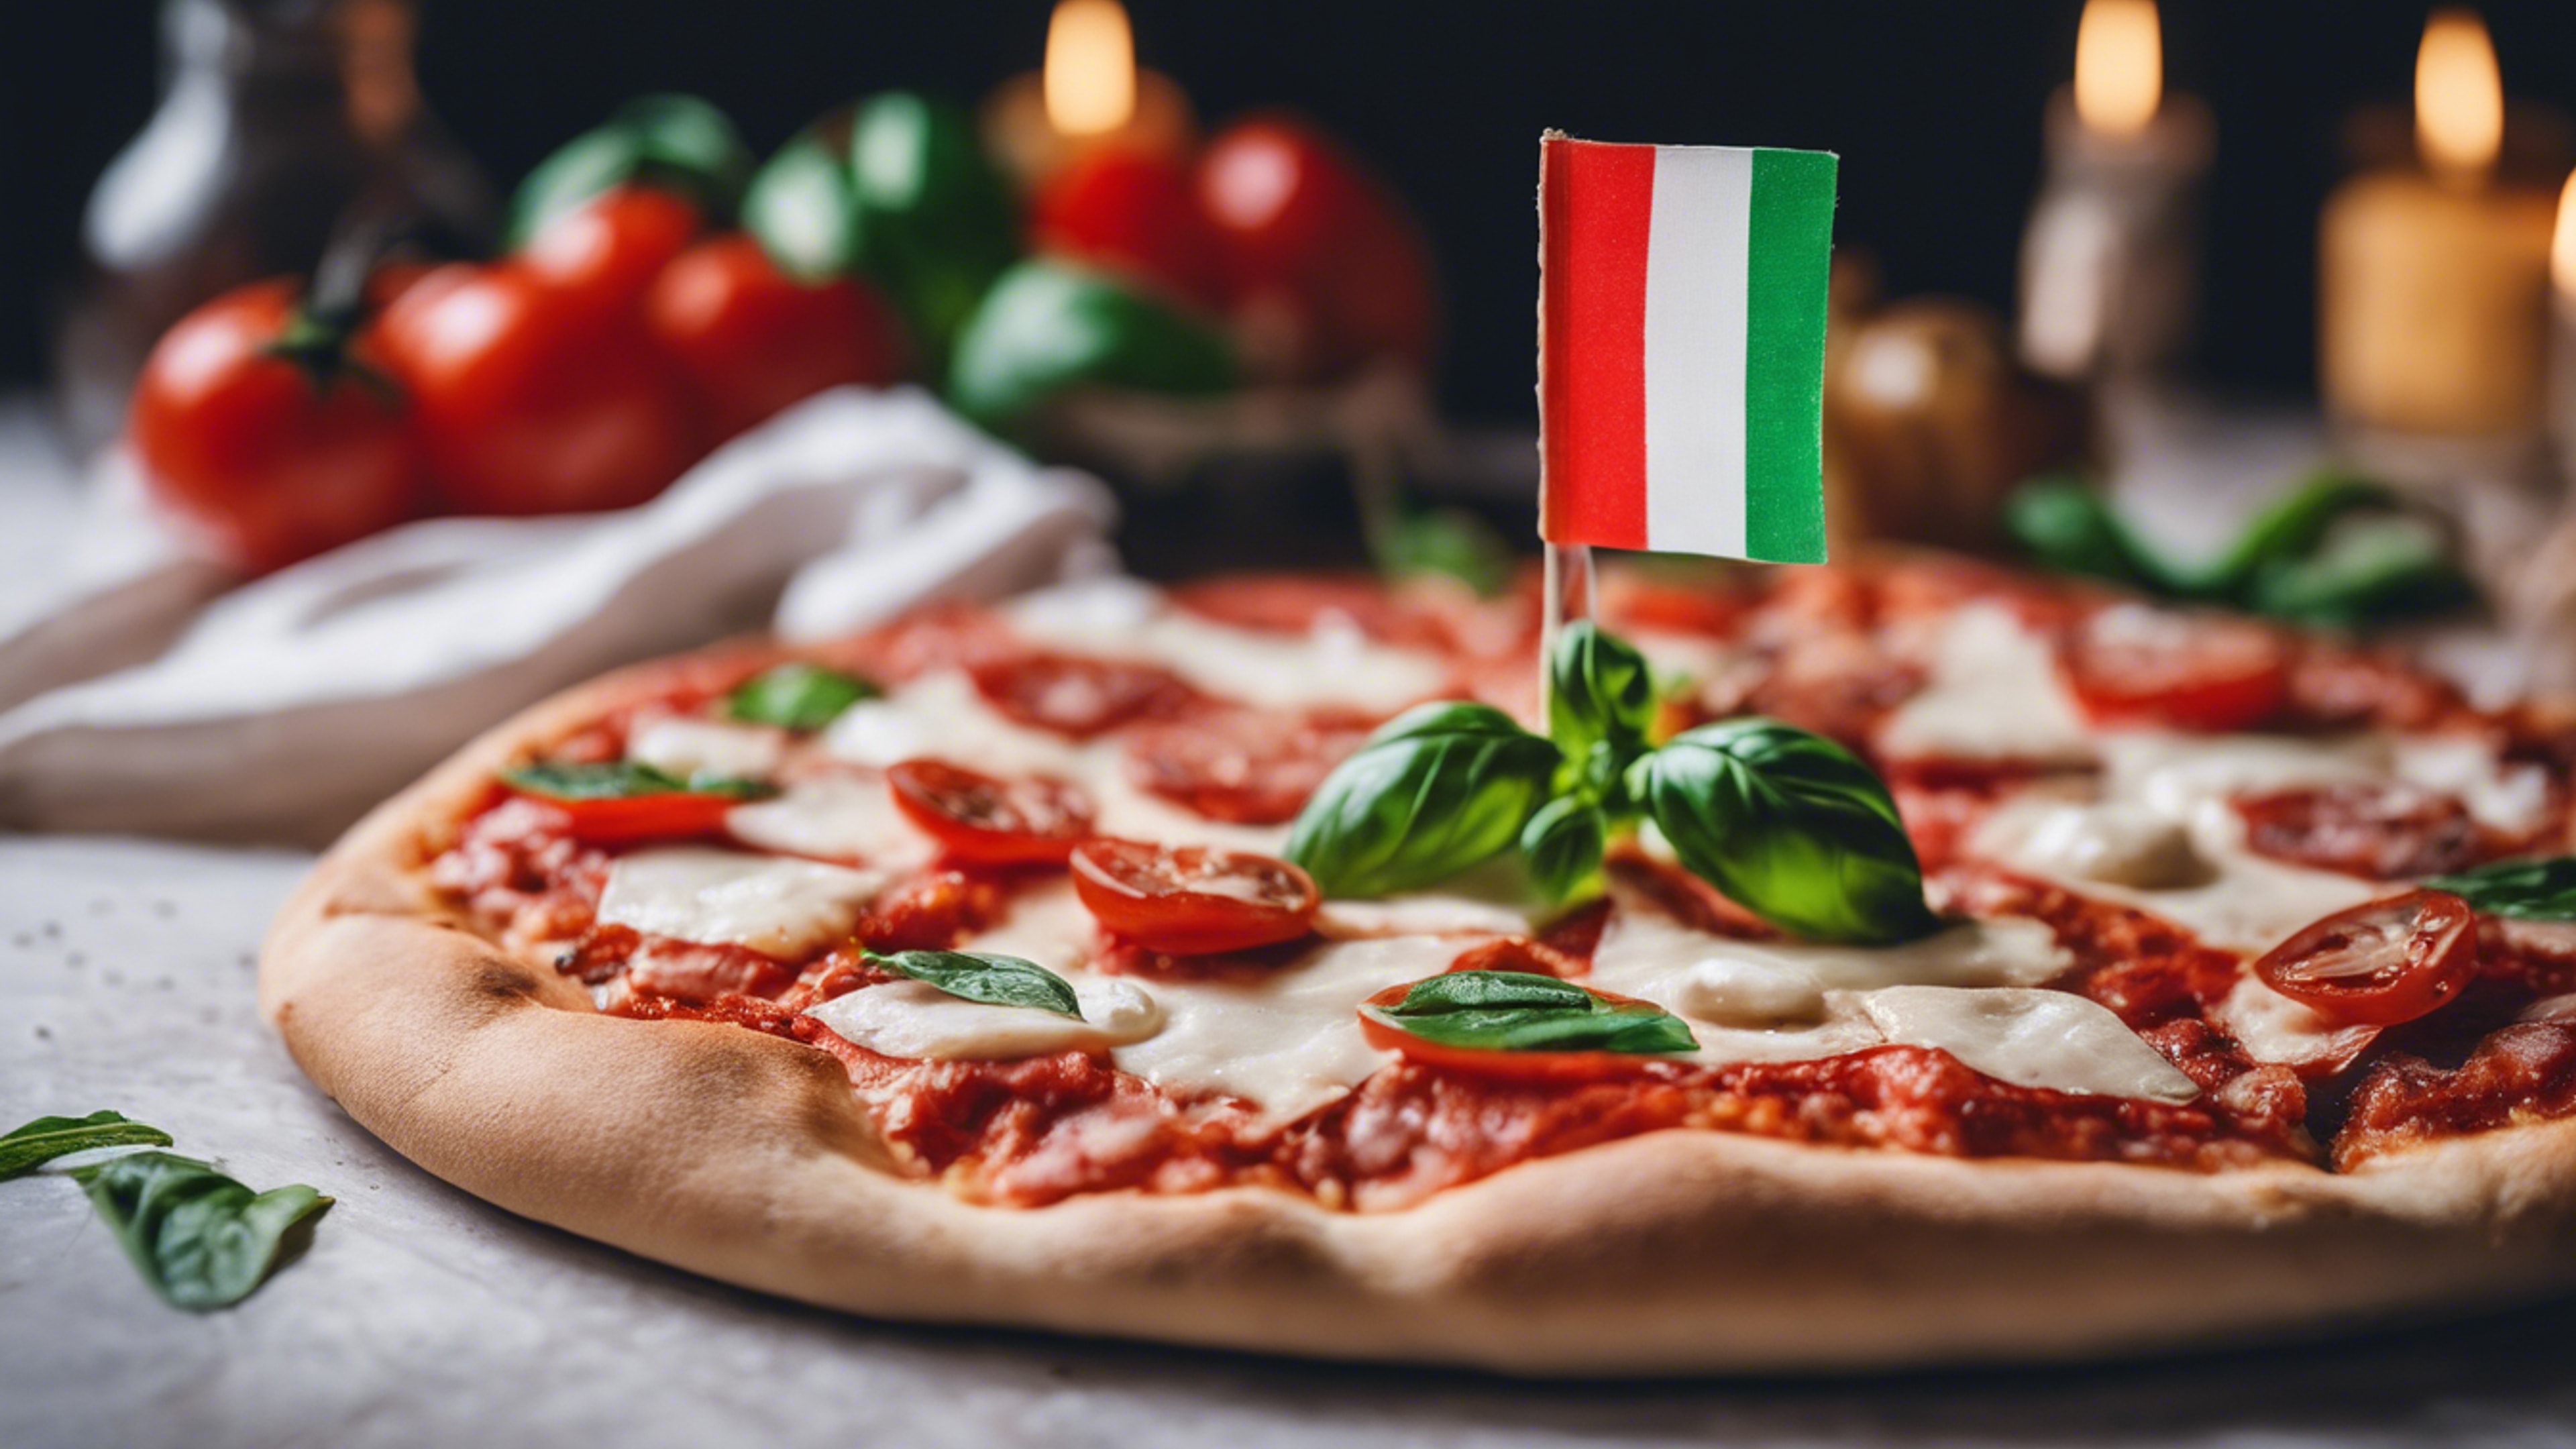 A delectable pizza margherita adorned with the vibrant colors of the Italian flag – green basil, white mozzarella, and red tomatoes. Fondo de pantalla[8d7c128777db467783aa]